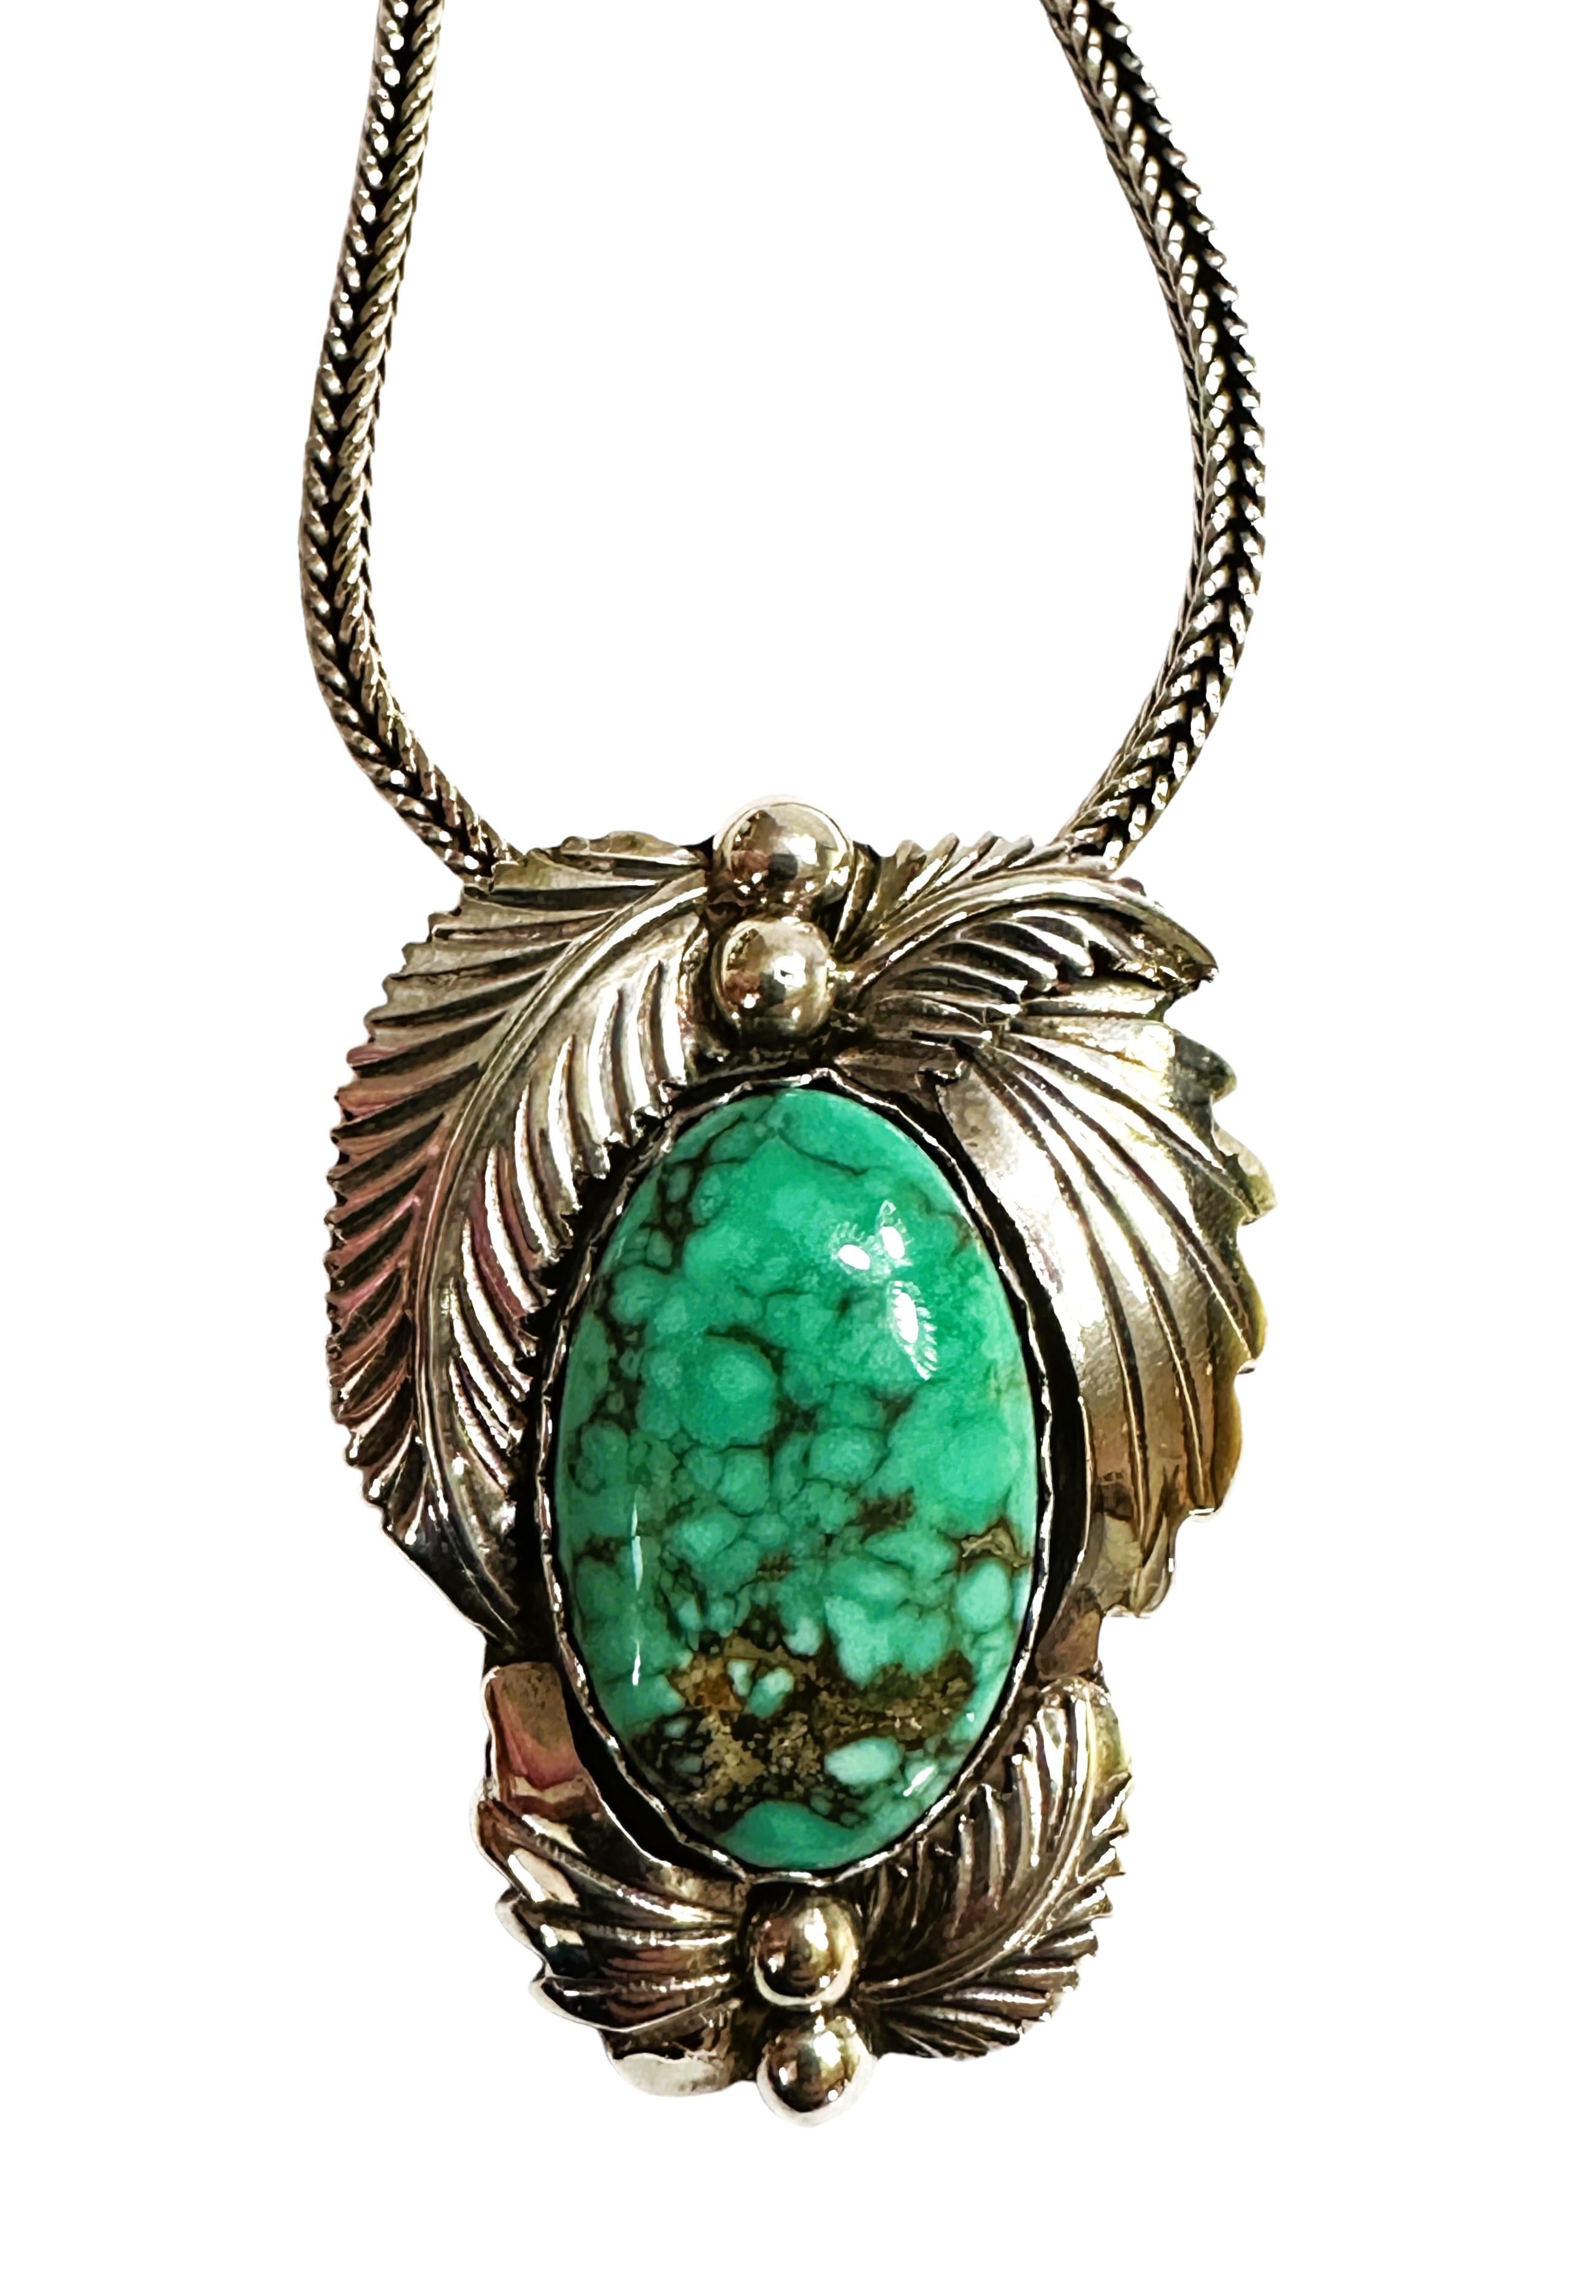 Handmade Sterling Turquoise Pendant & Sterling Chain Carico Lake Mine 2